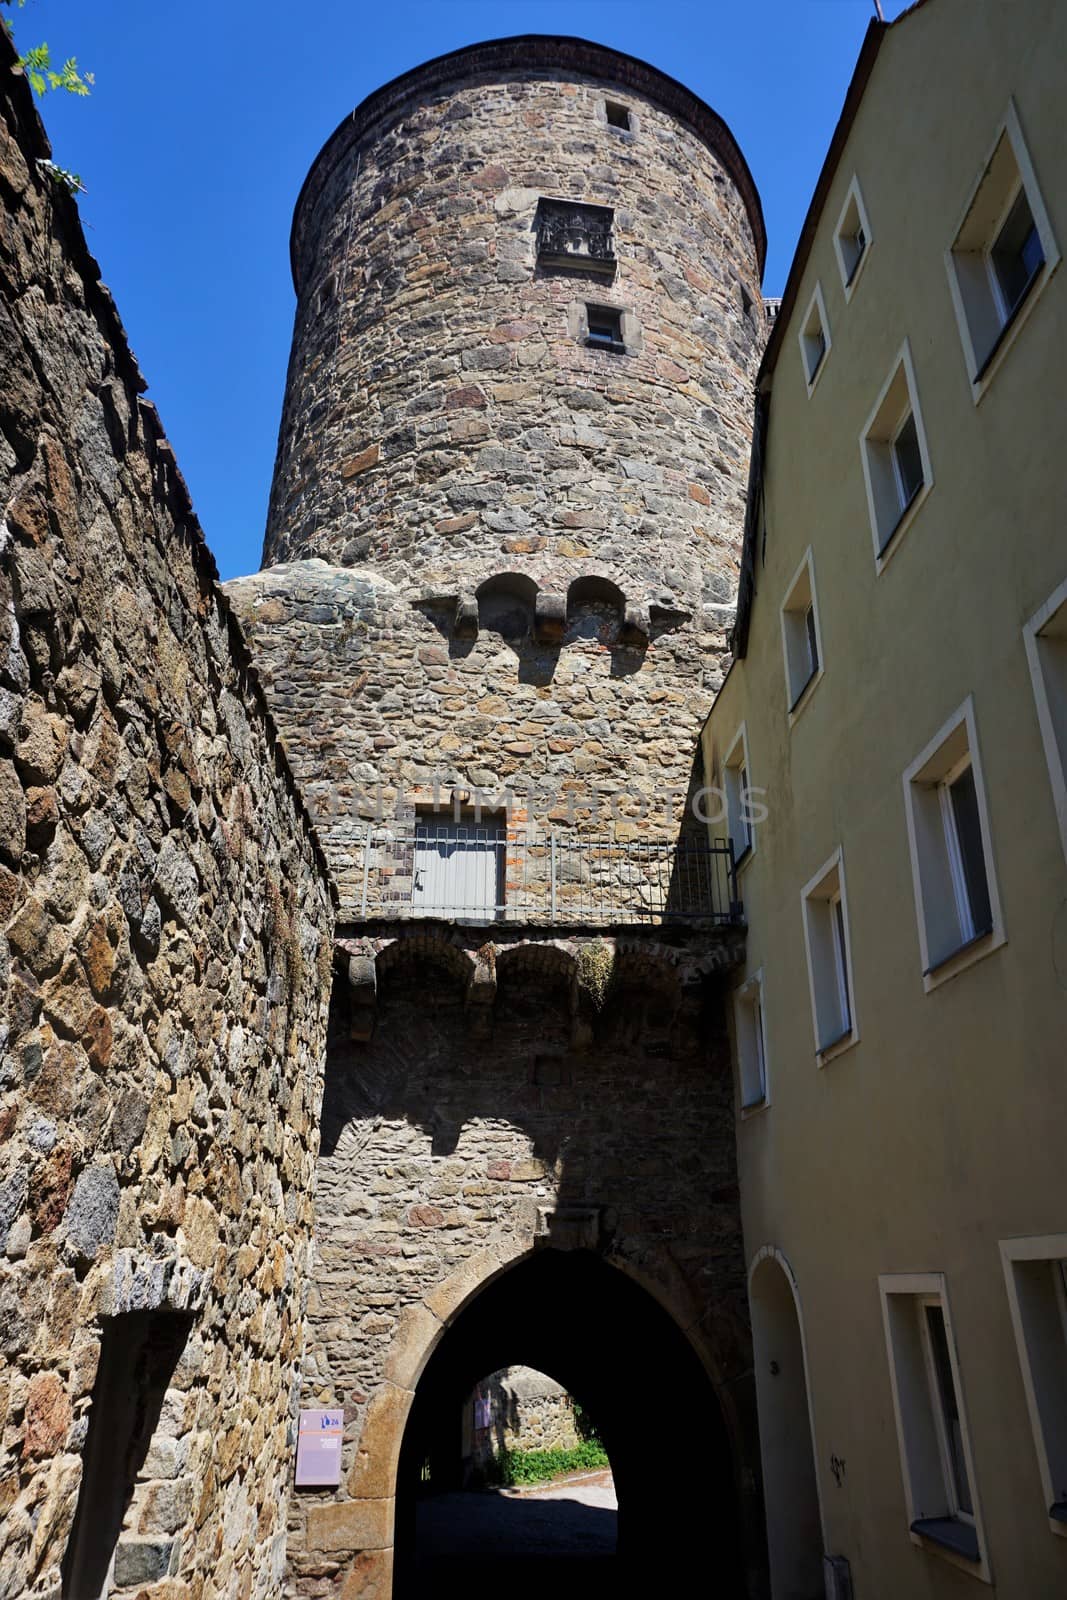 Nicolai tower from the narrow streets of Bautzen, Germany old town